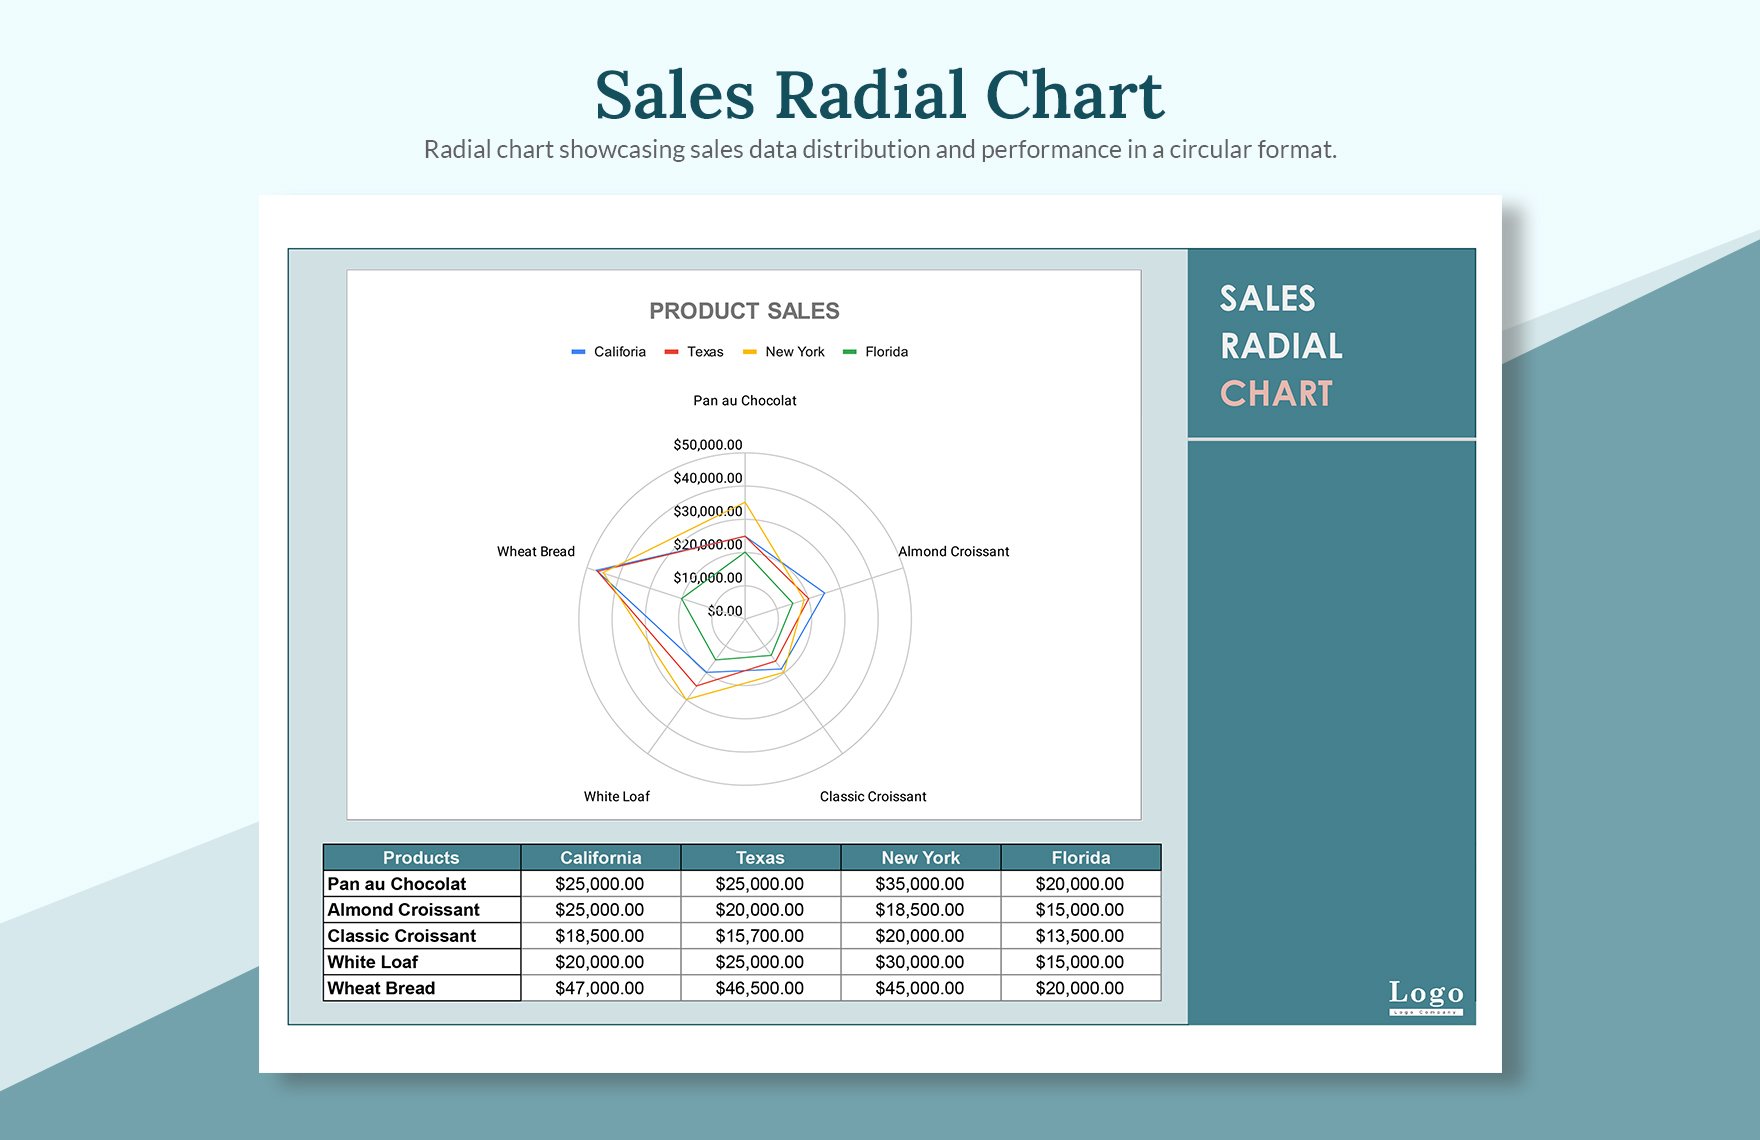 Sales Radial Chart